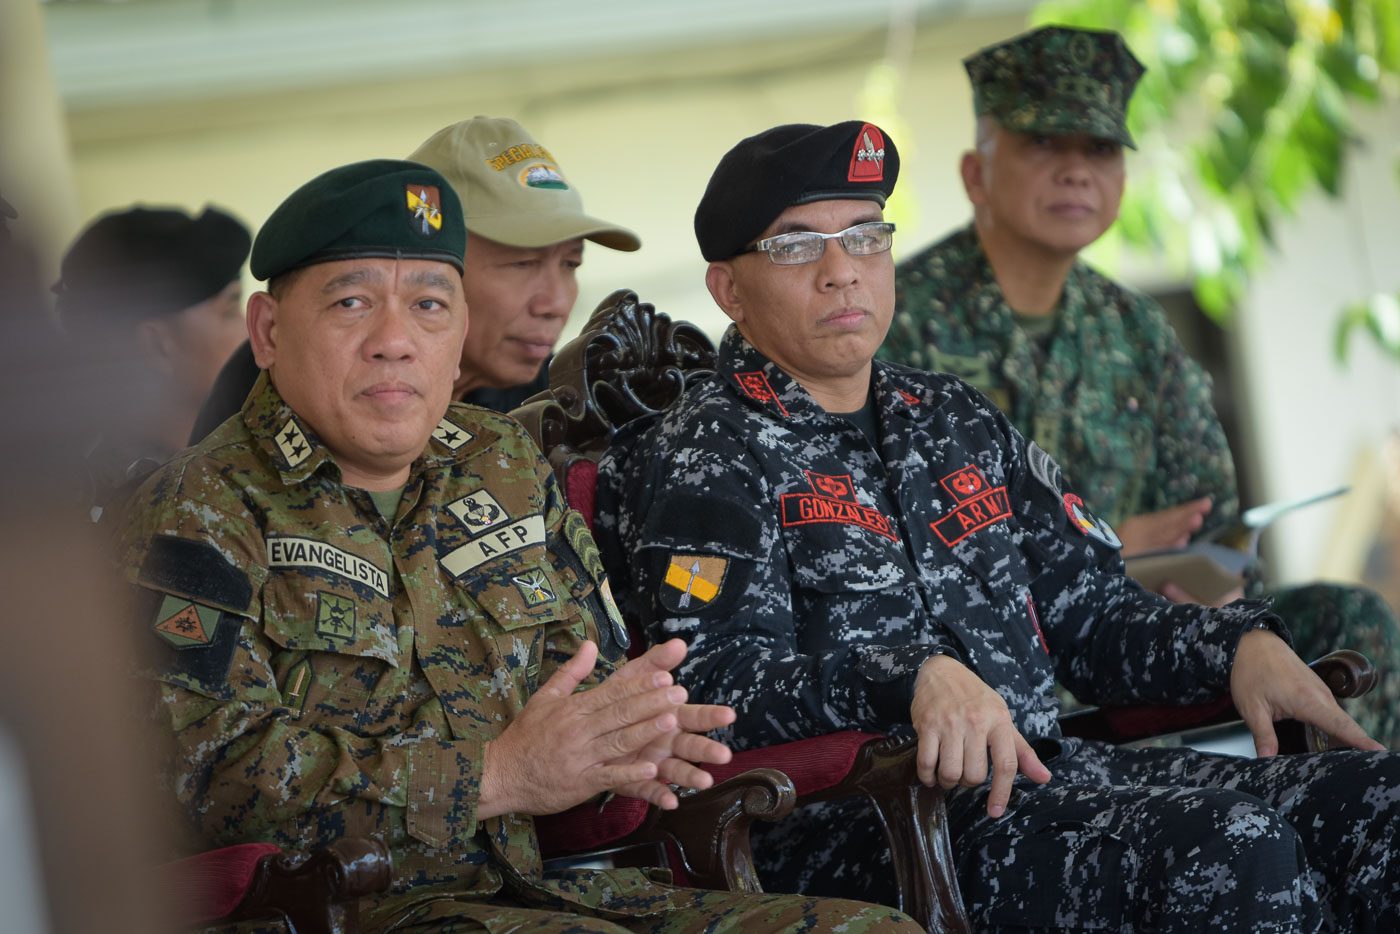 IN PHOTOS: Philippine Army’s elite units have new commanders